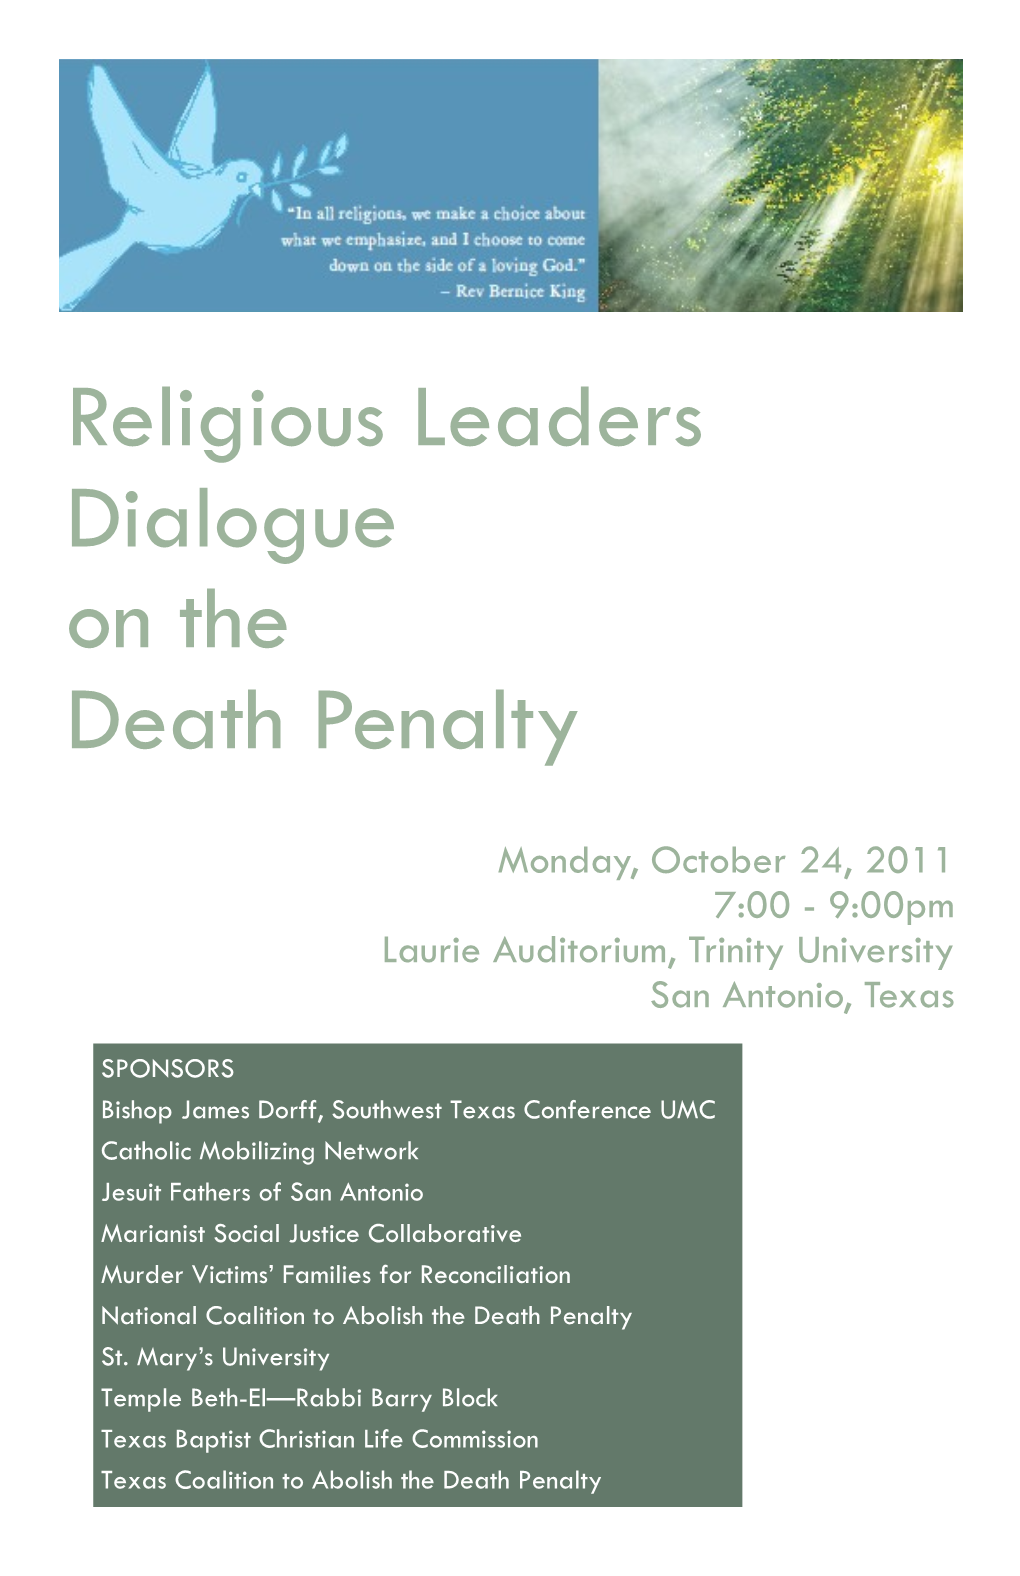 Religious Leaders Dialogue on the Death Penalty